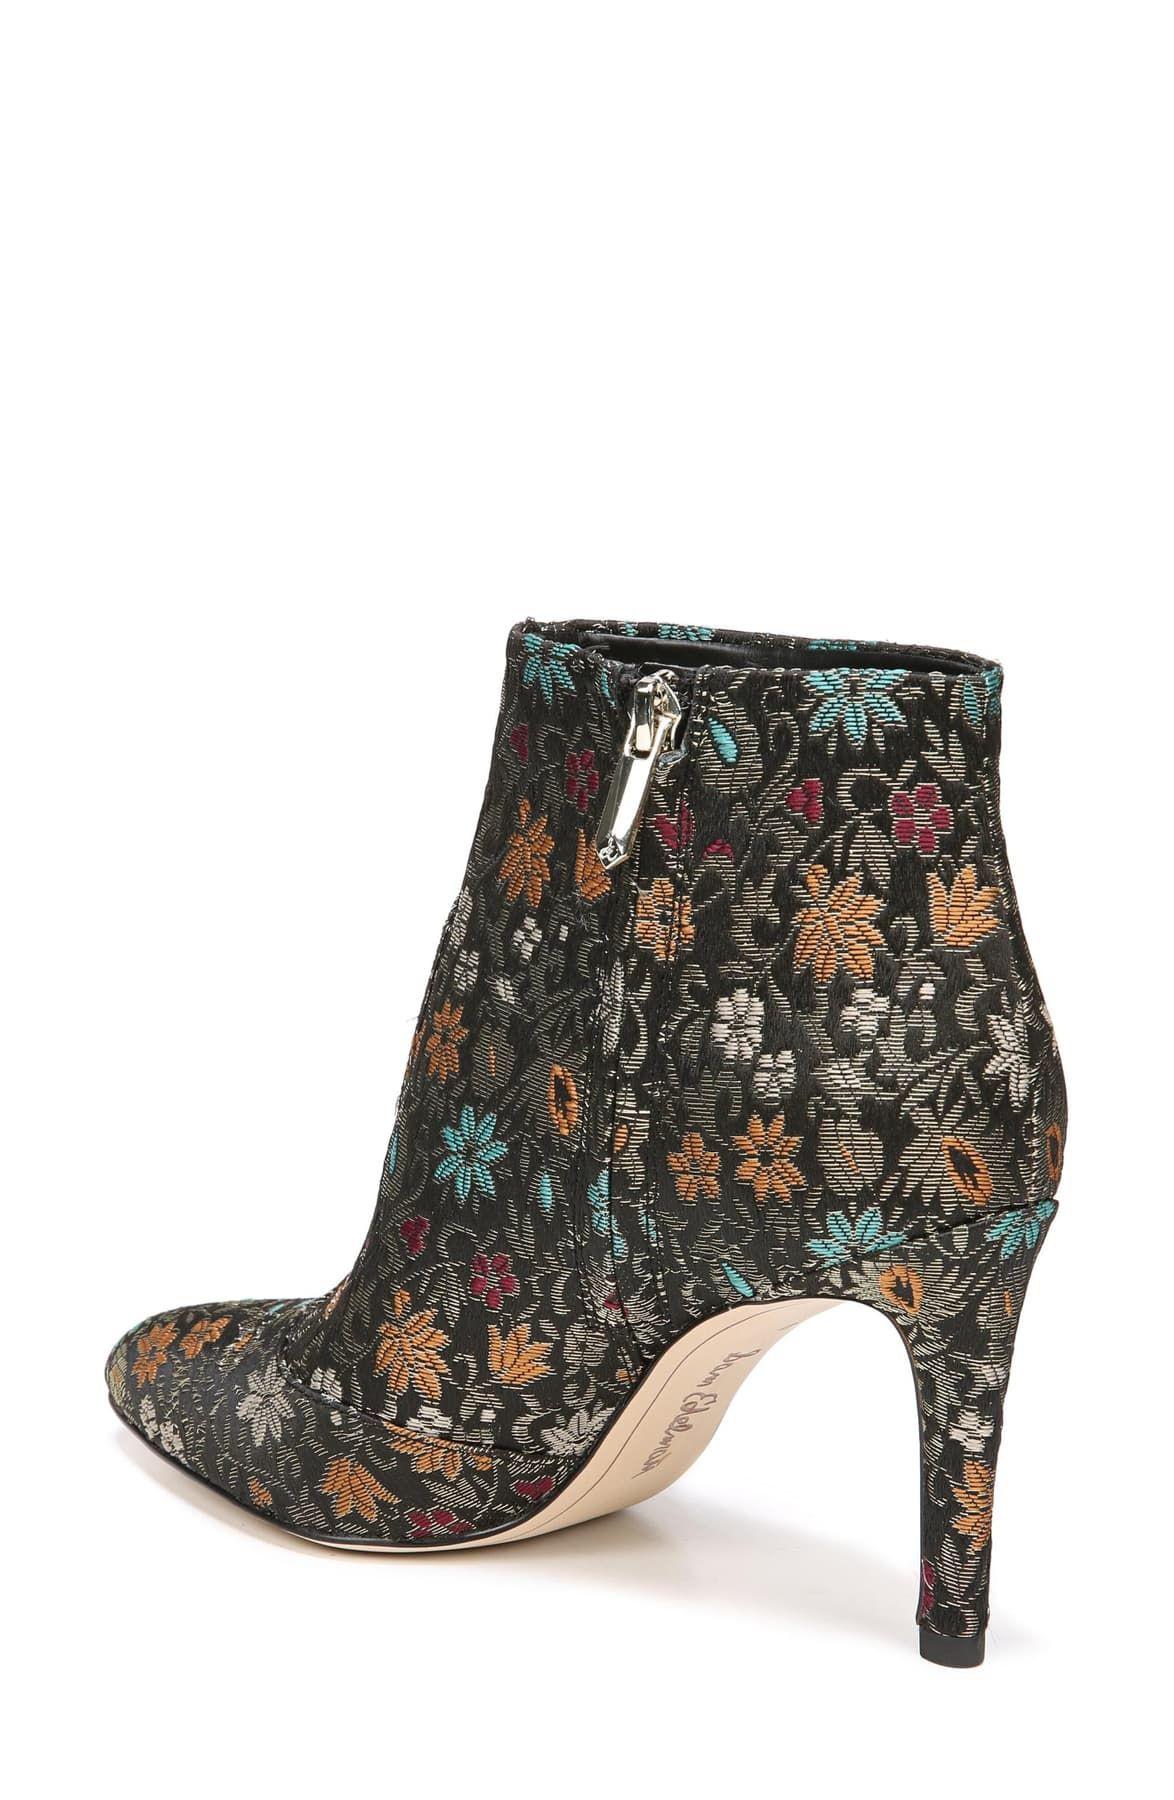 olette pointed toe bootie